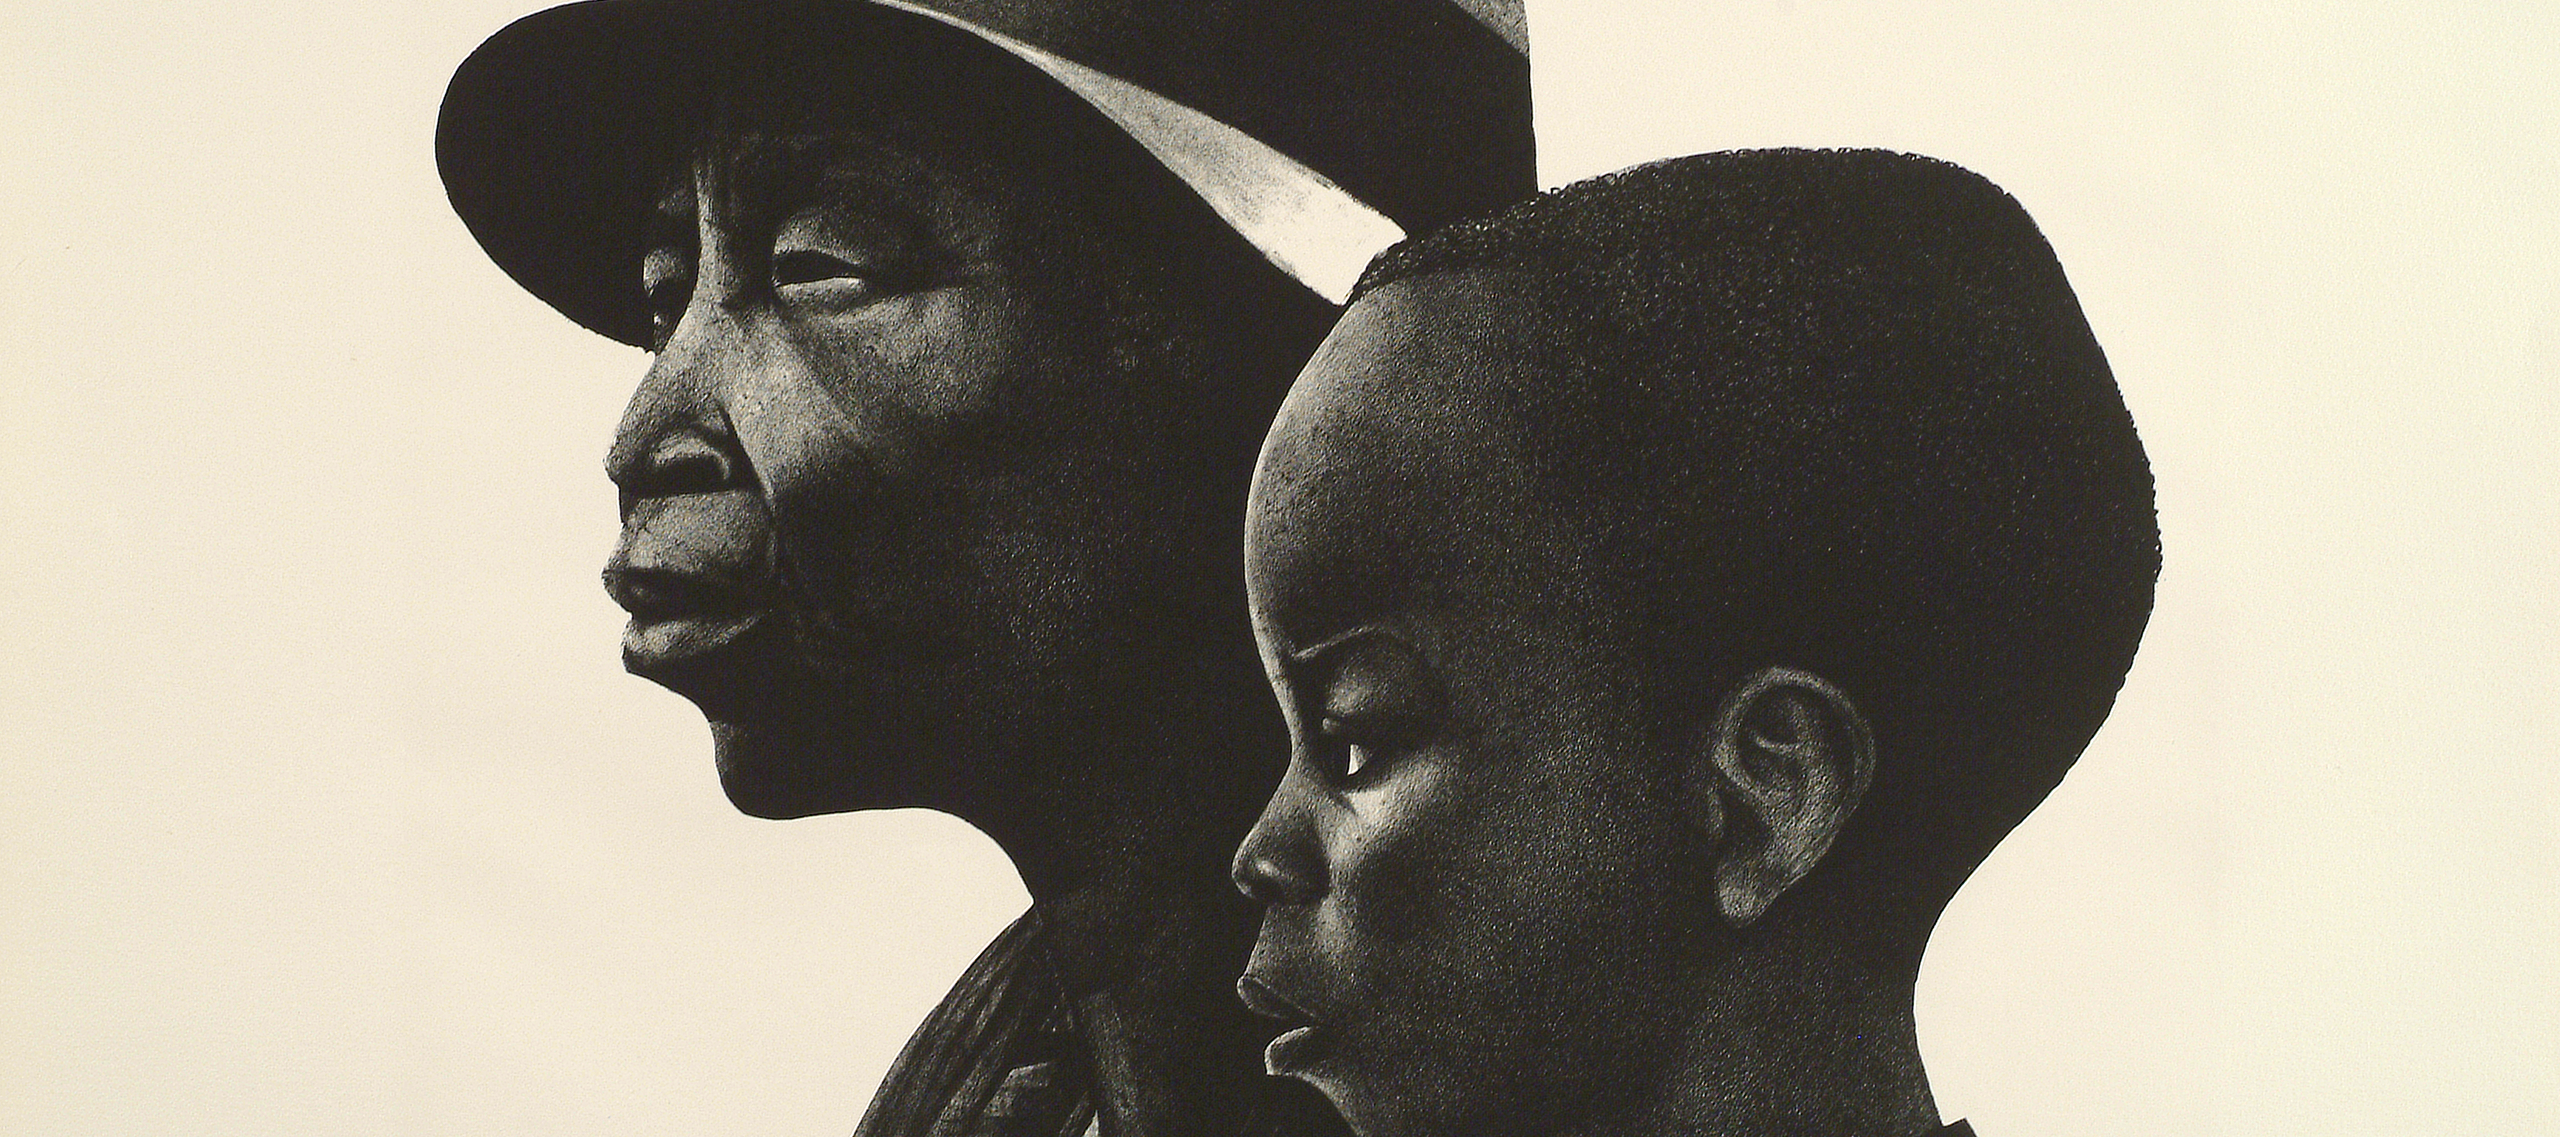 A black-and-white print of two dark-skinned individuals in profile, facing left. The person in the background is an older adult wearing a brimmed hat, and in the foreground and slightly to the right is a young child with coarse hair cut close to the head.